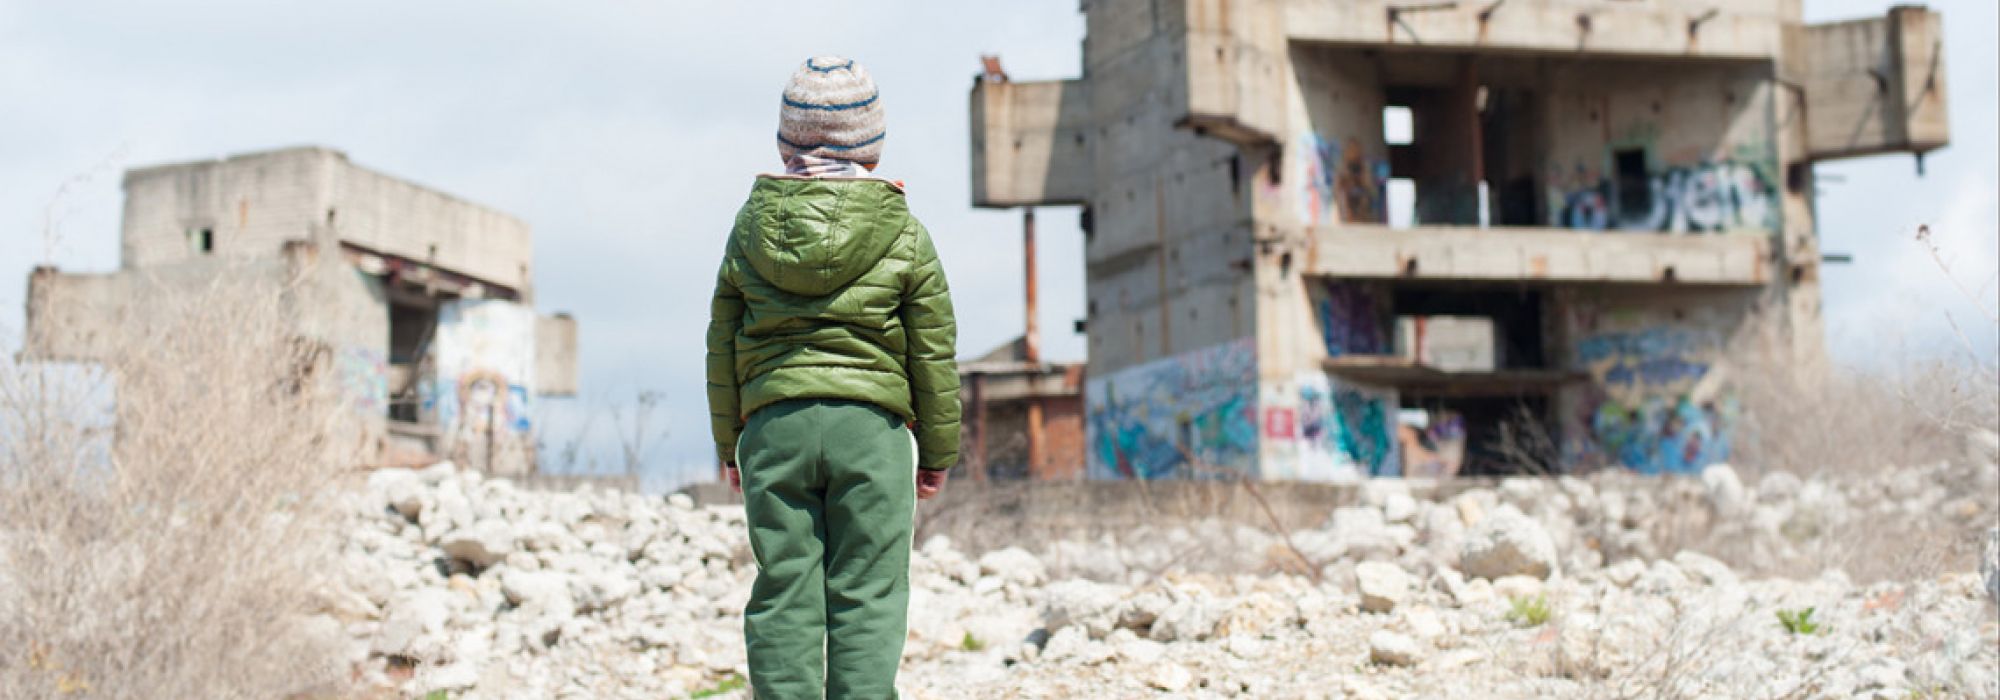 A young child in a conflict zone